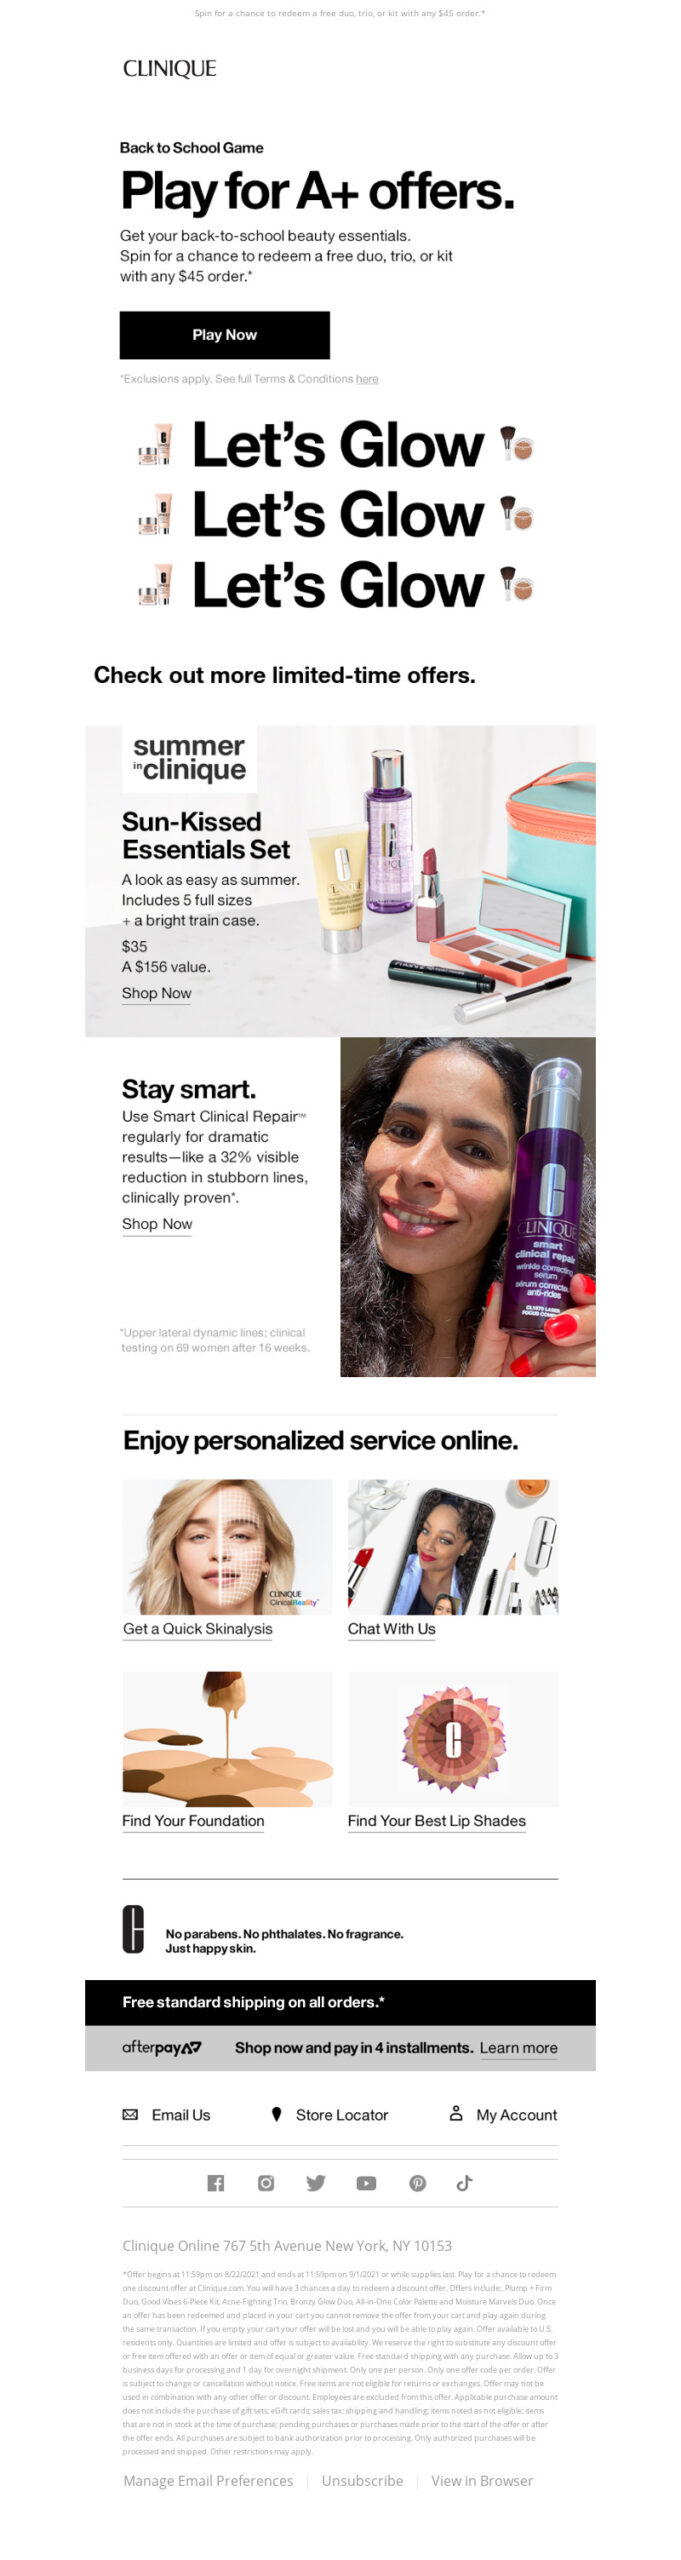 Clinique back-to-school email marketing